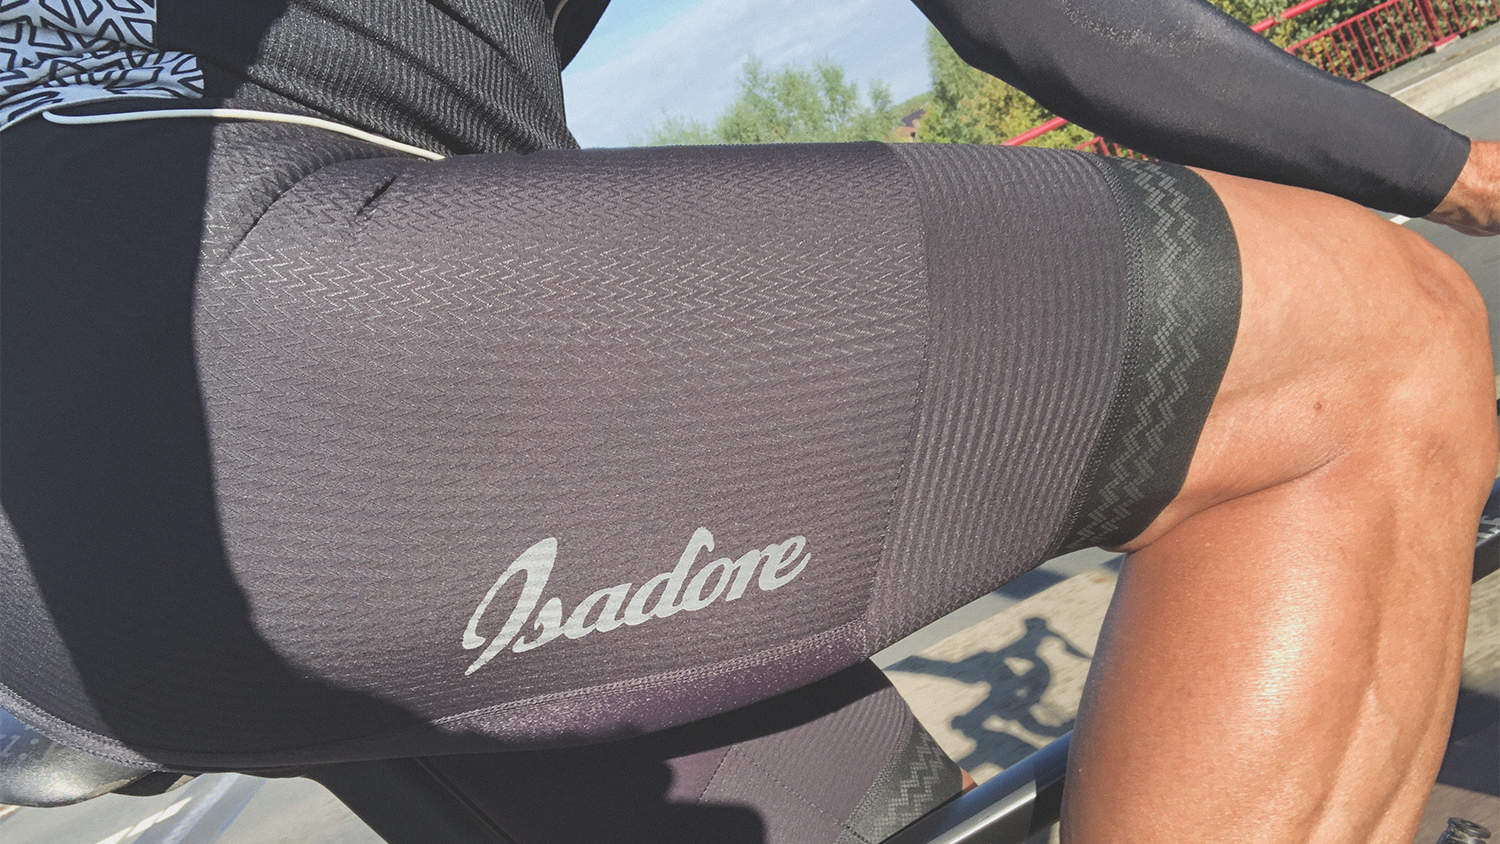 Review: Cycling Isadore Climbers Kit